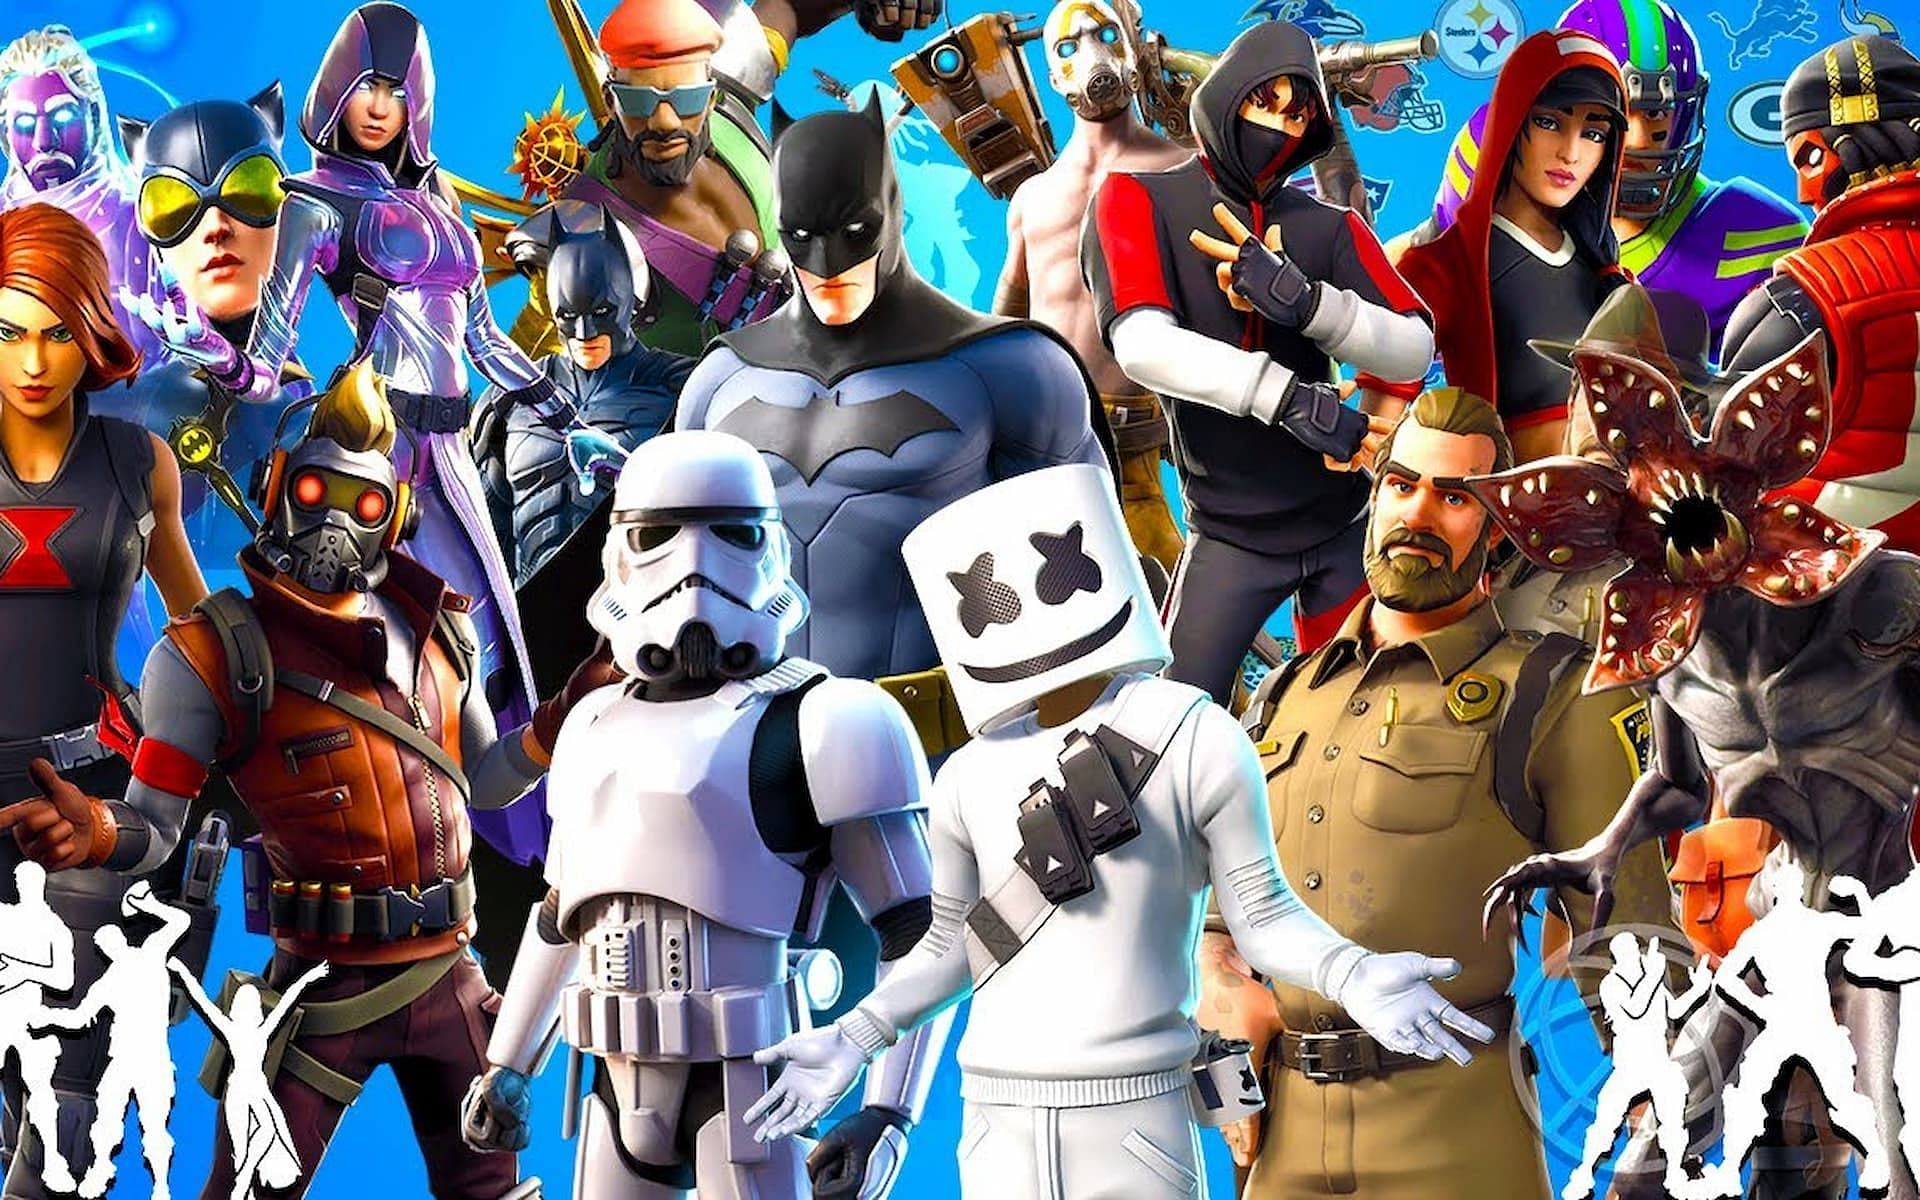 Are Fortnite collaborations going overboard yet again?